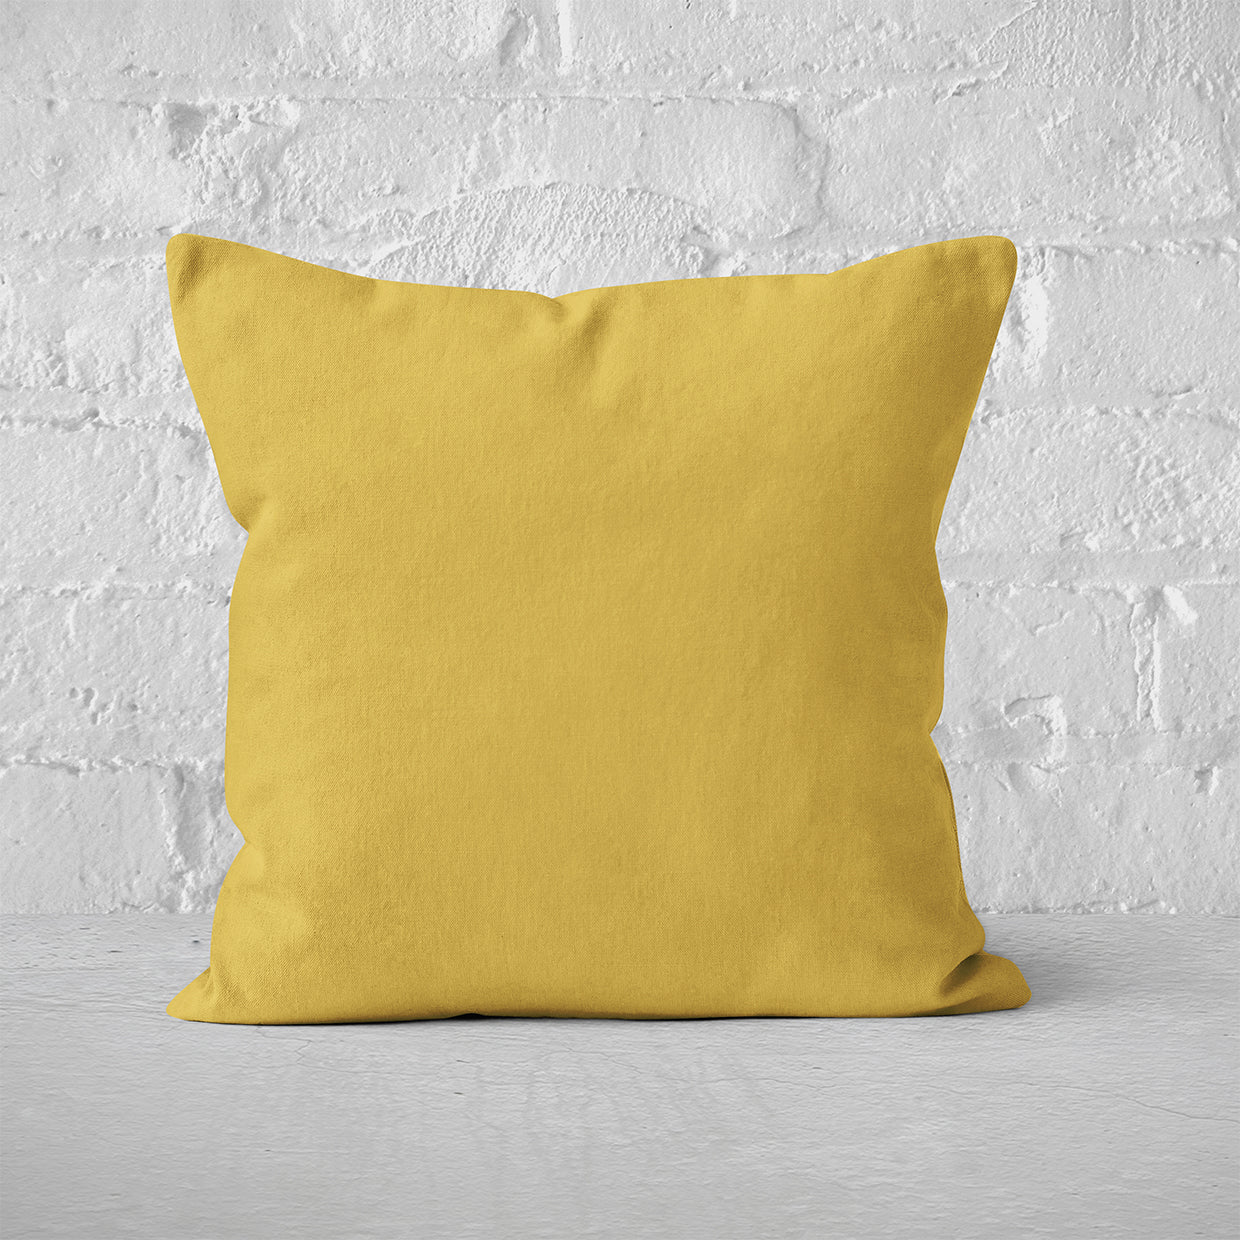 Pillow Cover Art Feature 'Solid' - Tan - Cotton Twill